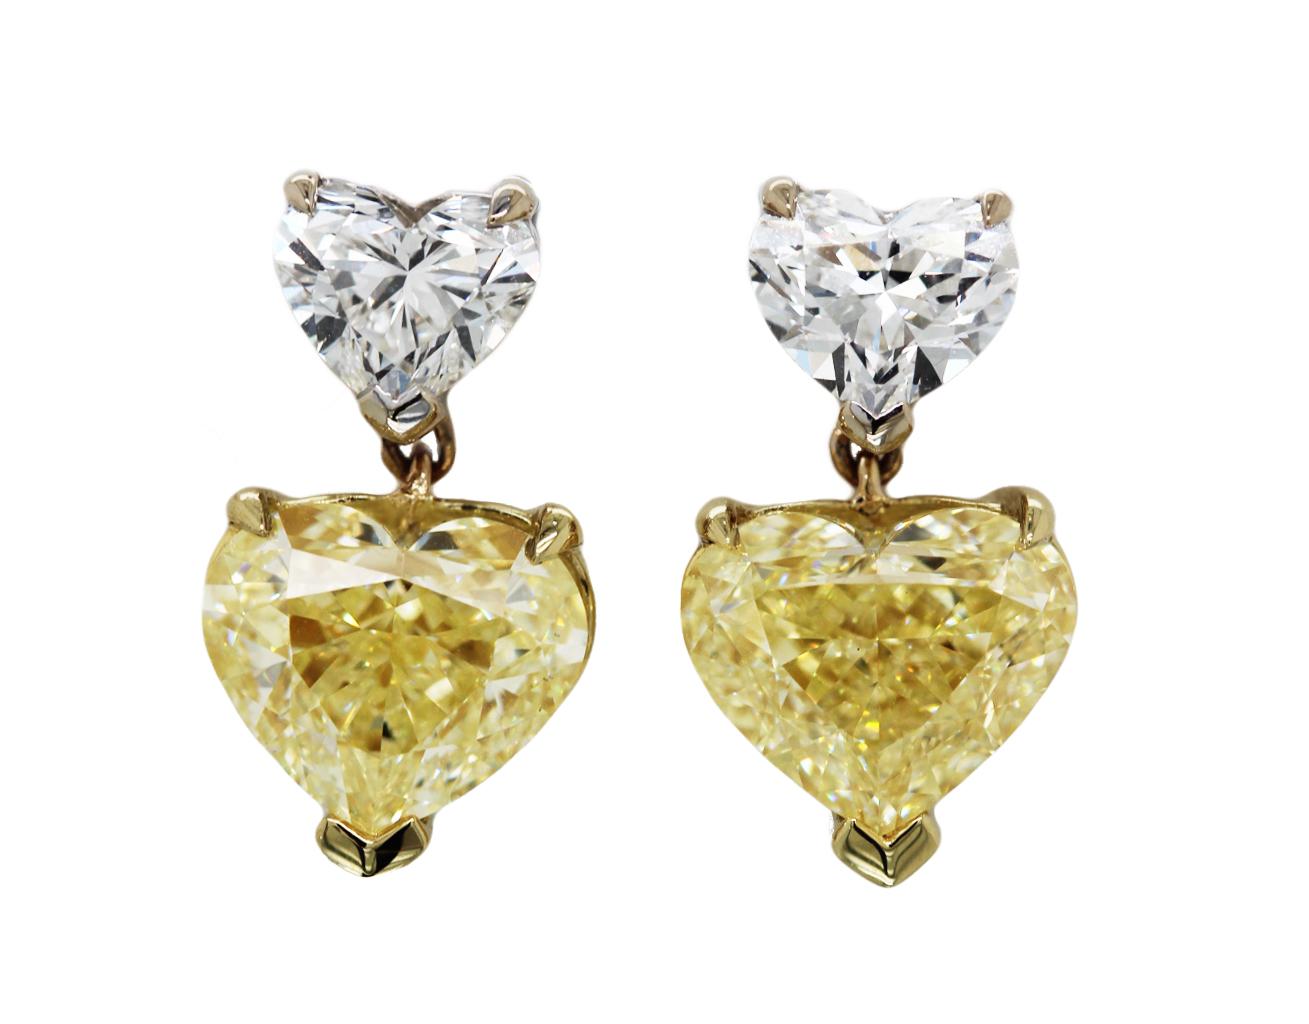 GIA Matching Fancy Light Yellow 3.77 Ct Heart-Cut Diamond Drop Earrings 18K YG In New Condition For Sale In New York, NY